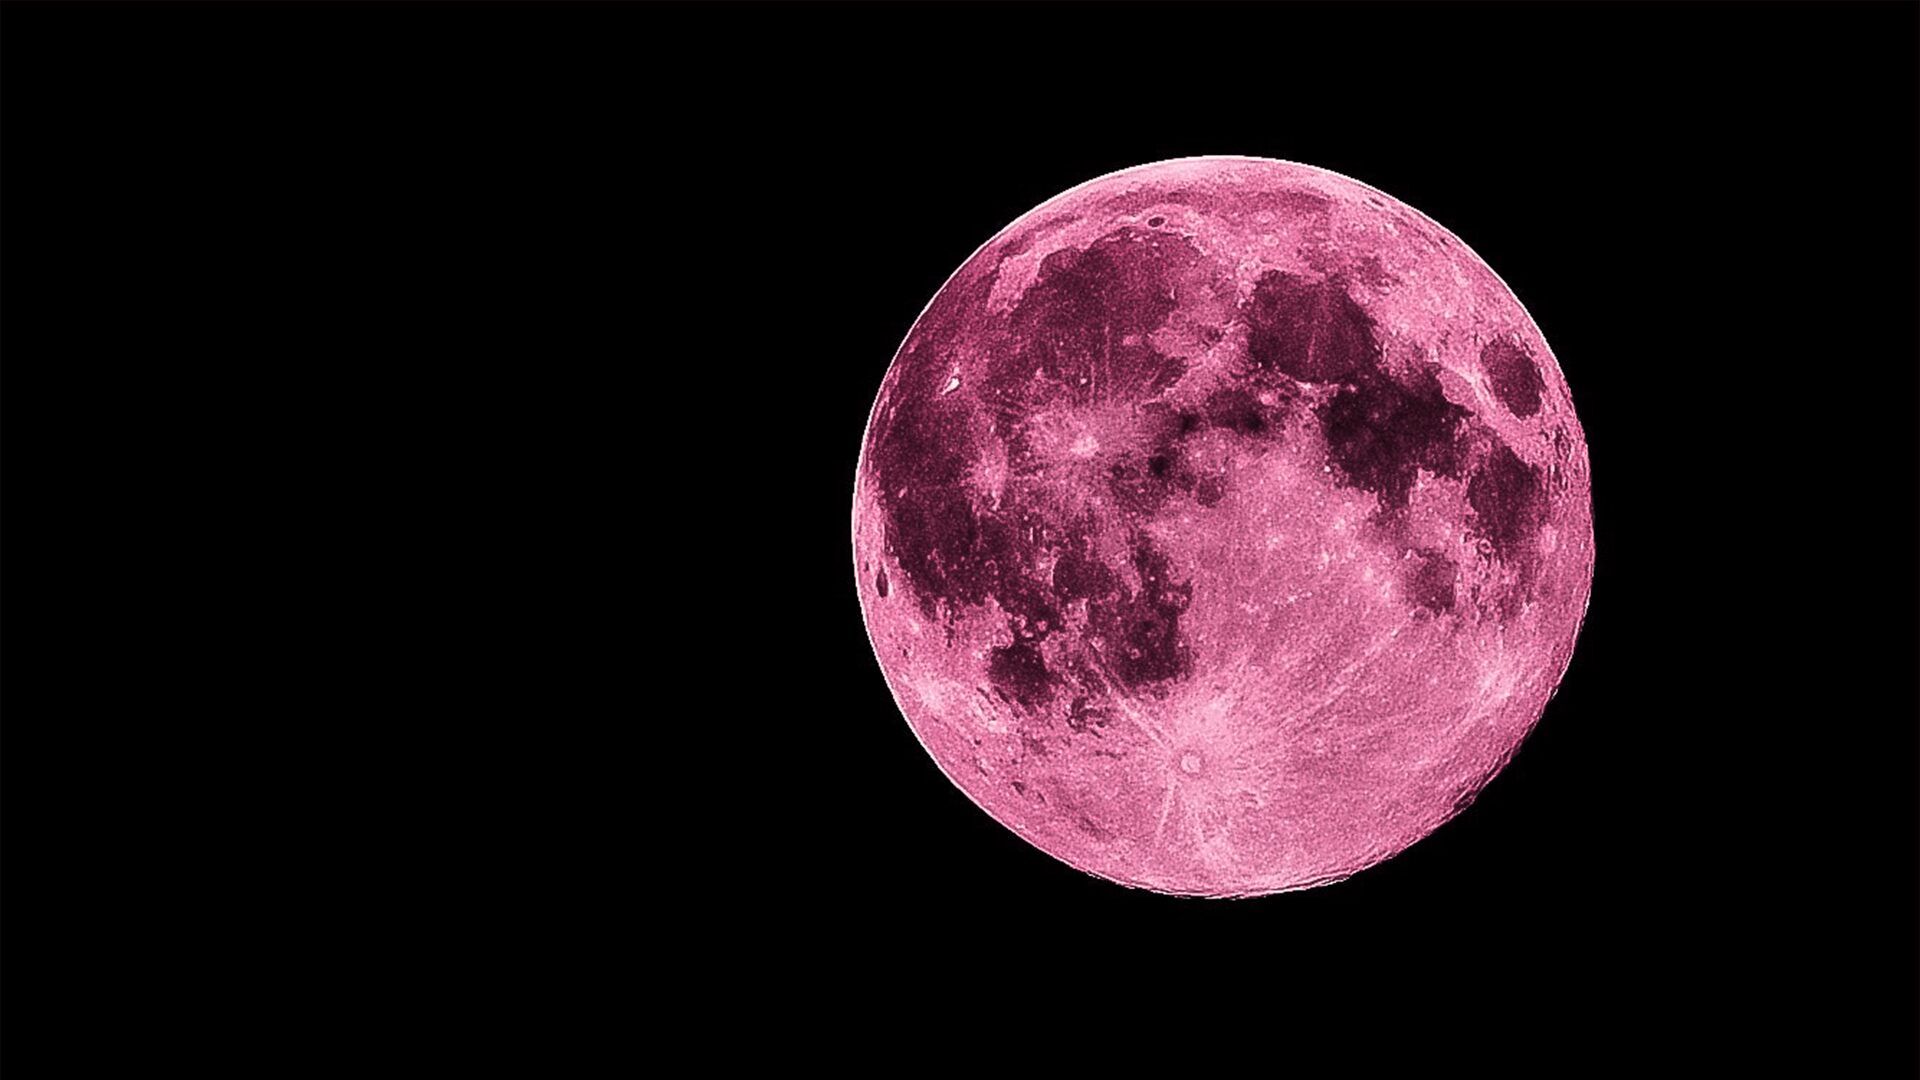 Advertising Background Pink Moon Wallpaper Image For Free Download  Pngtree